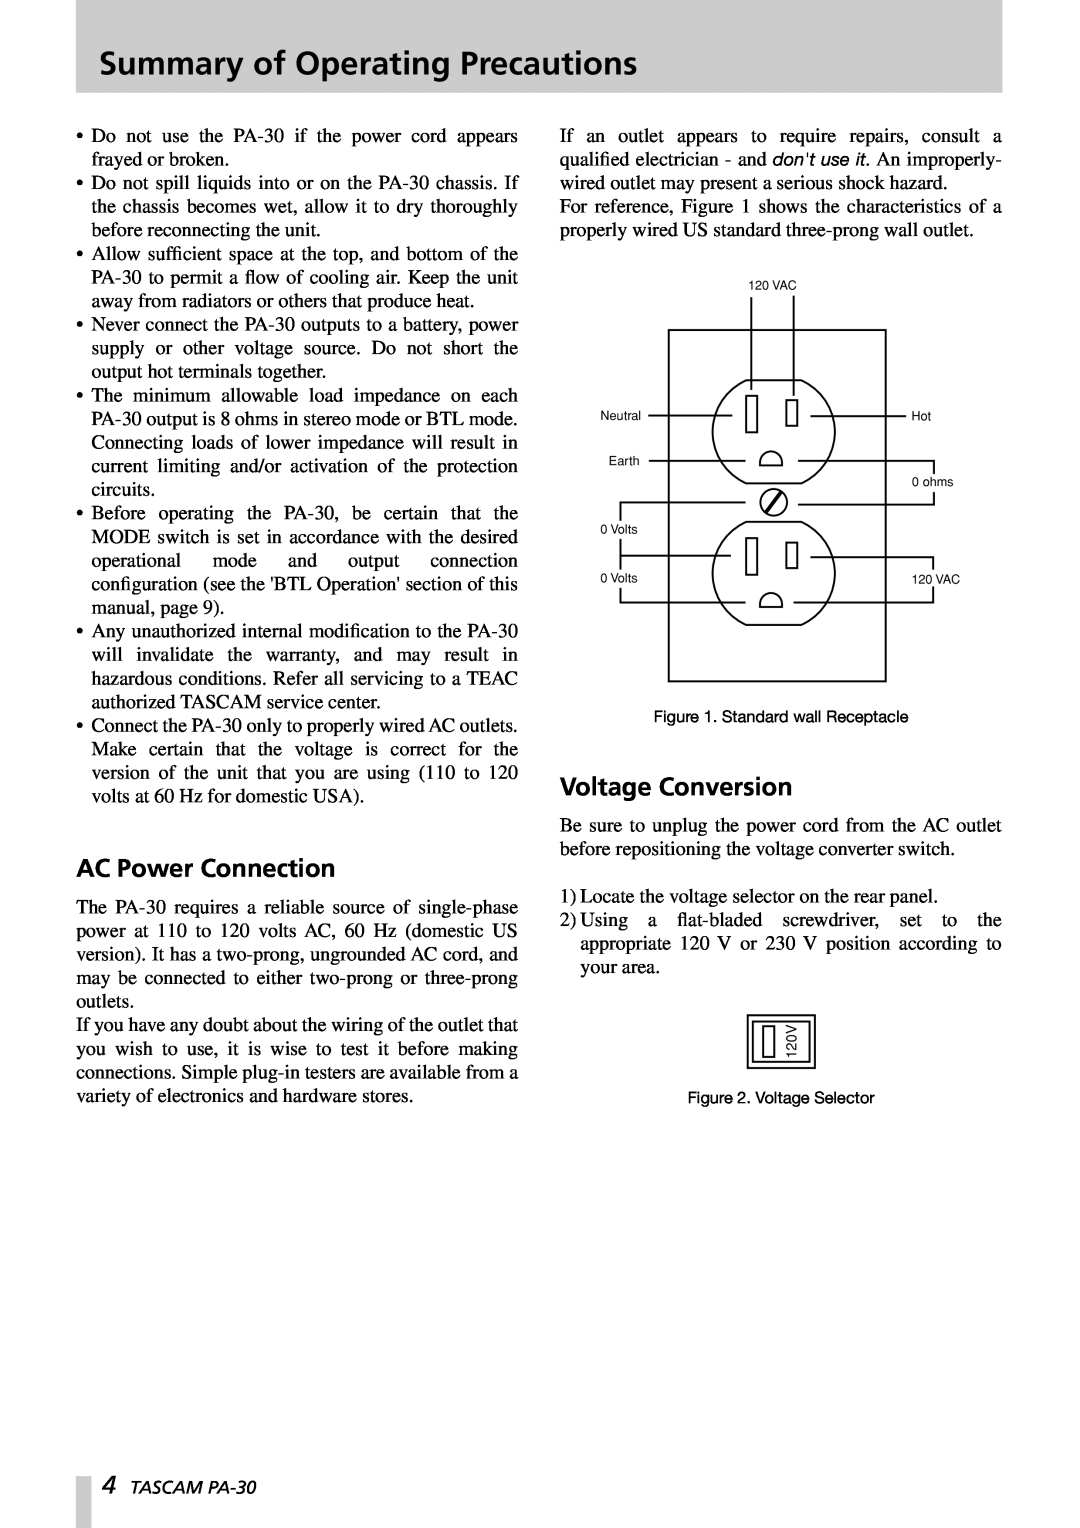 Tascam PA-30 owner manual Summary of Operating Precautions, AC Power Connection, Voltage Conversion 